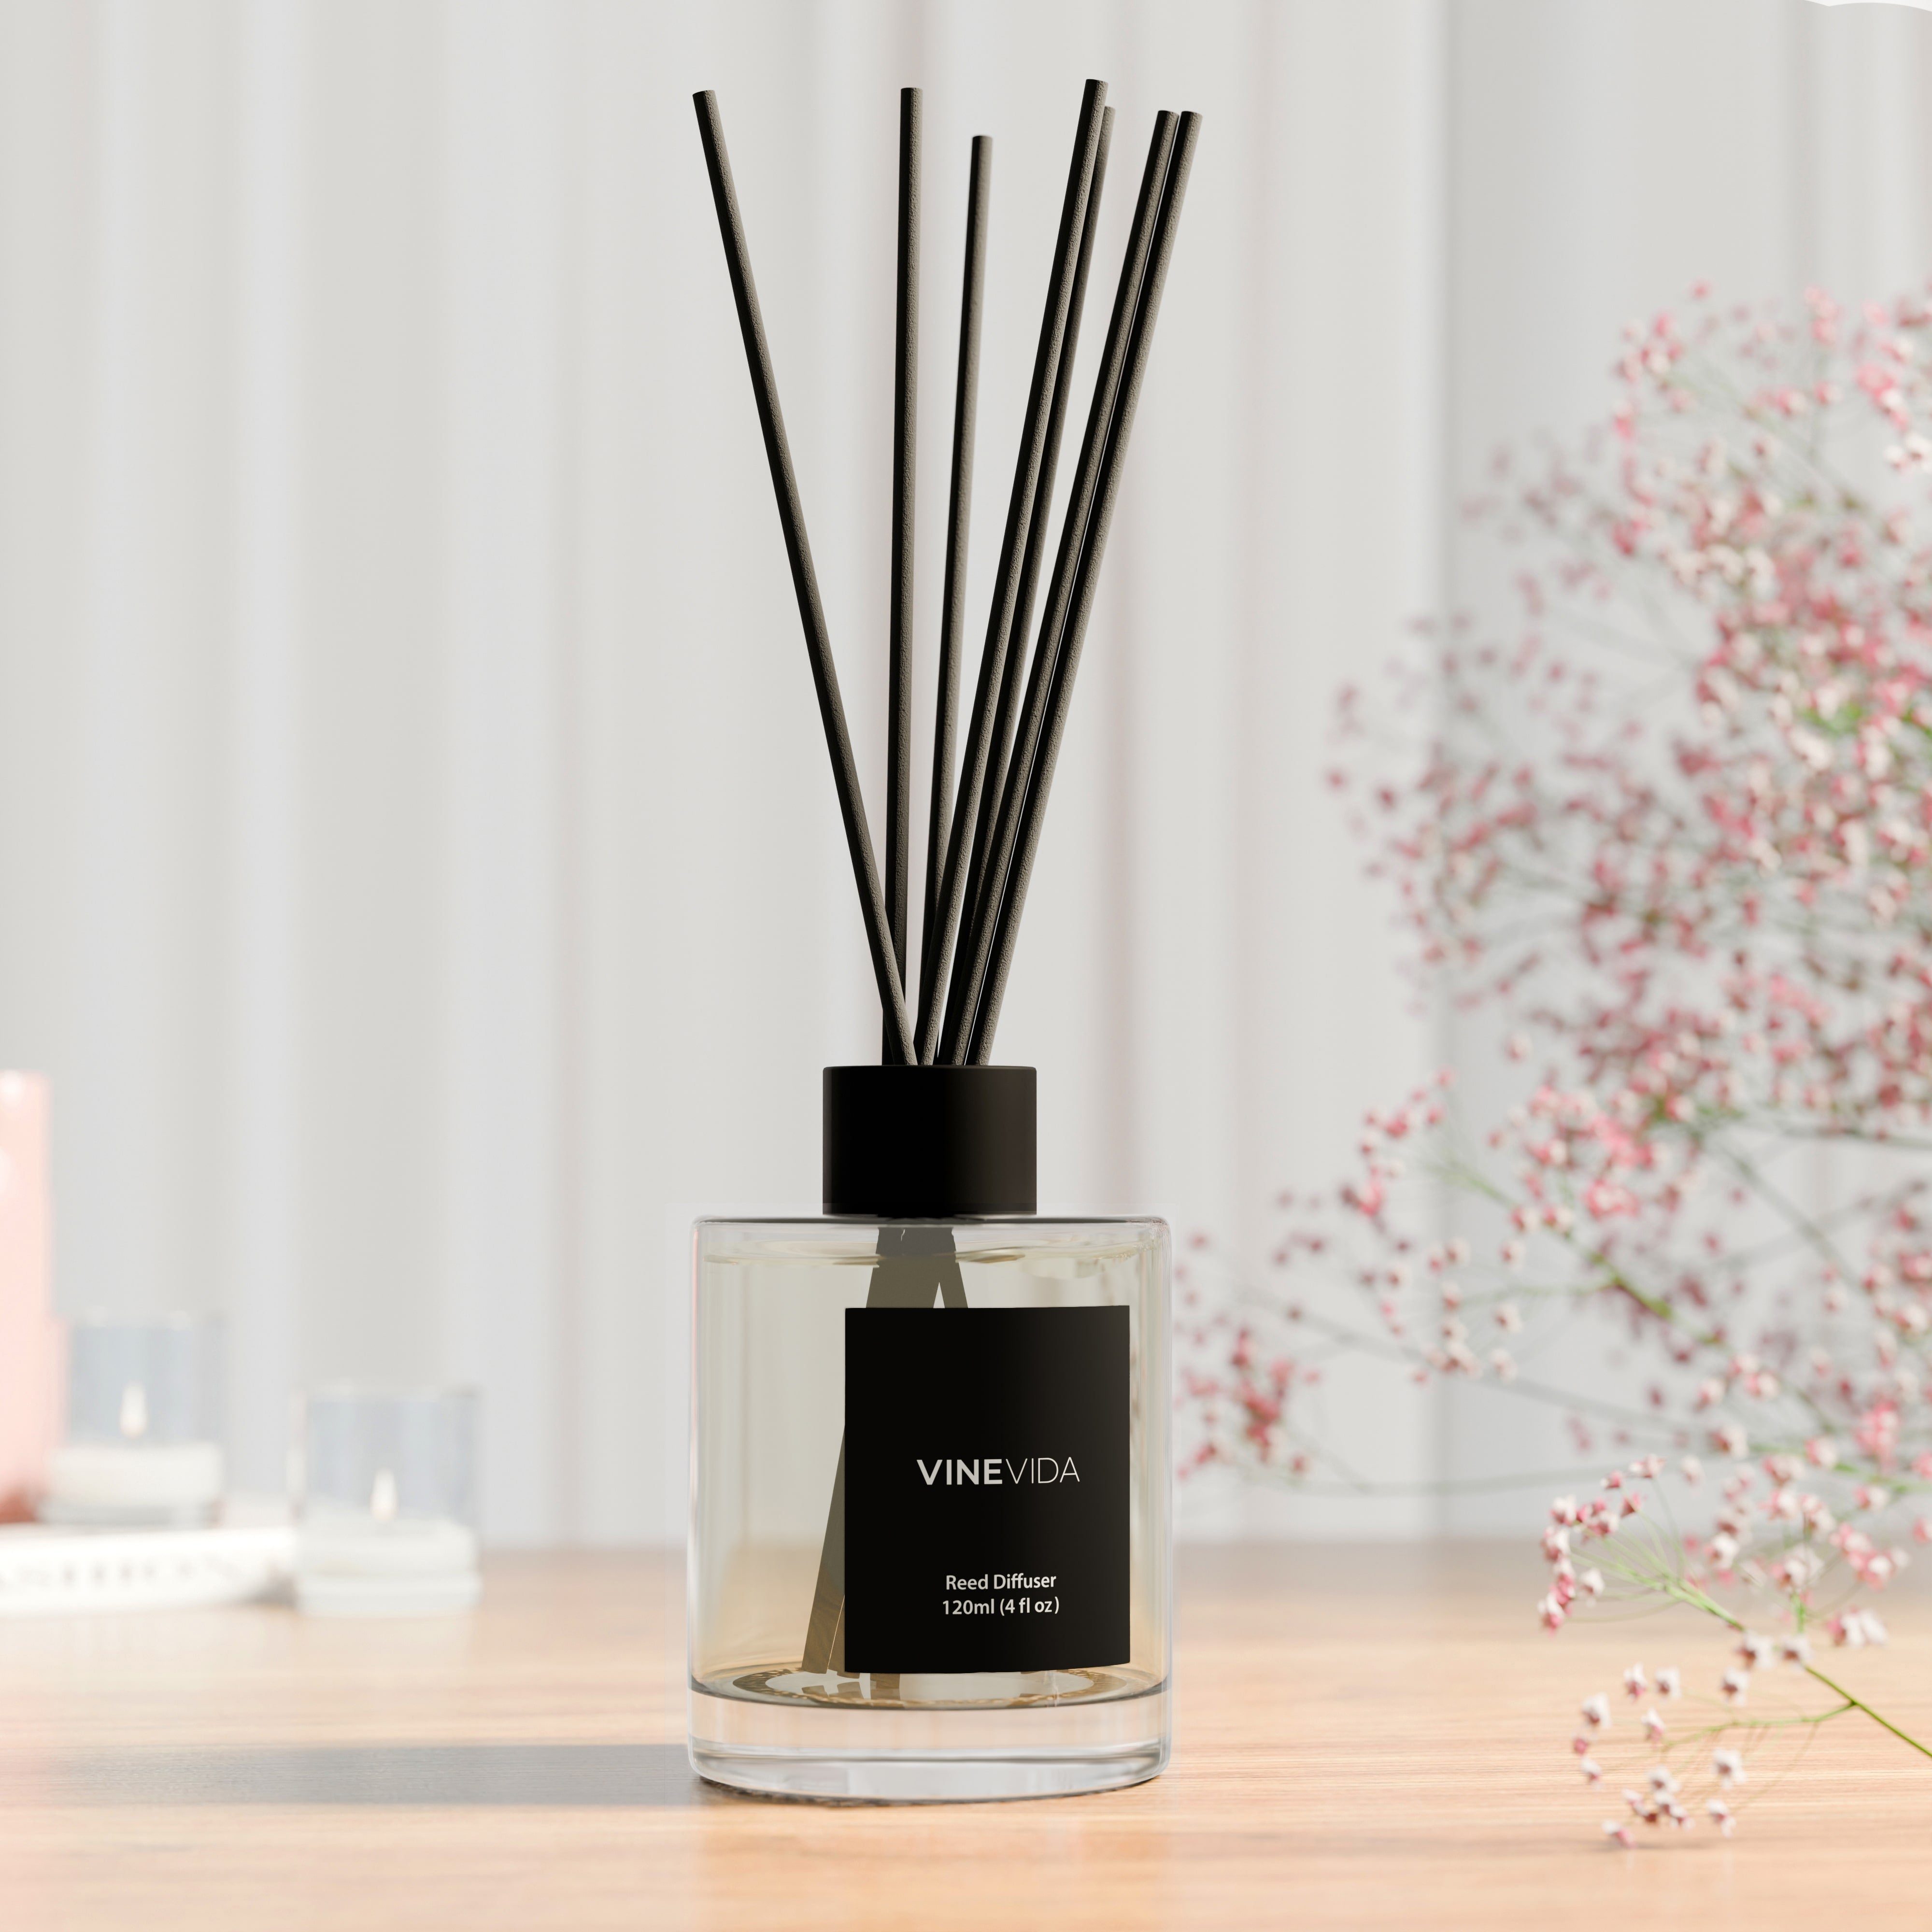 NO. 3000 Reed Diffuser - Inspired by: Chanel Bleu by Chanel